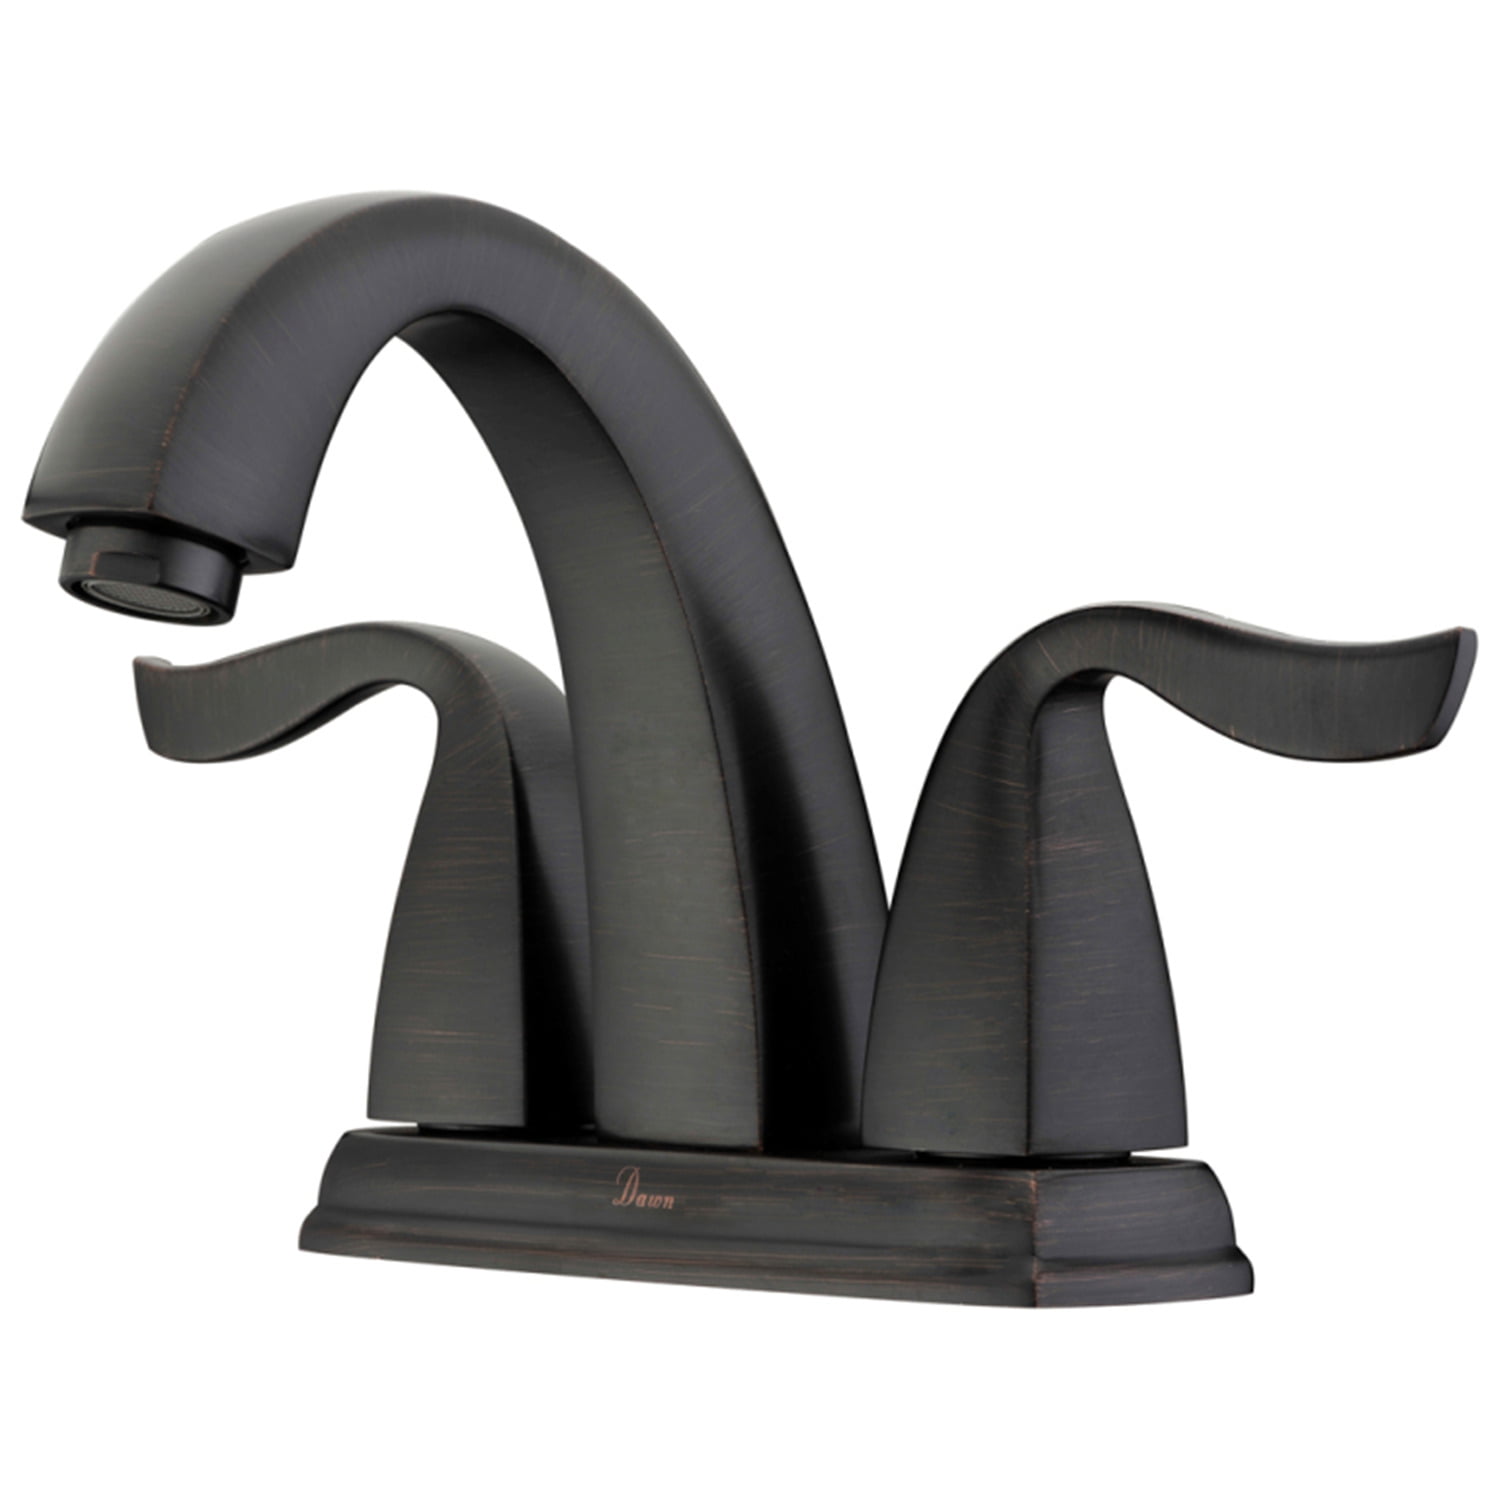 Ab04 1273dbr 2-hole, 2-handle Centerset Lavatory Faucet For 4 In. Centers, Dark Brown Finished